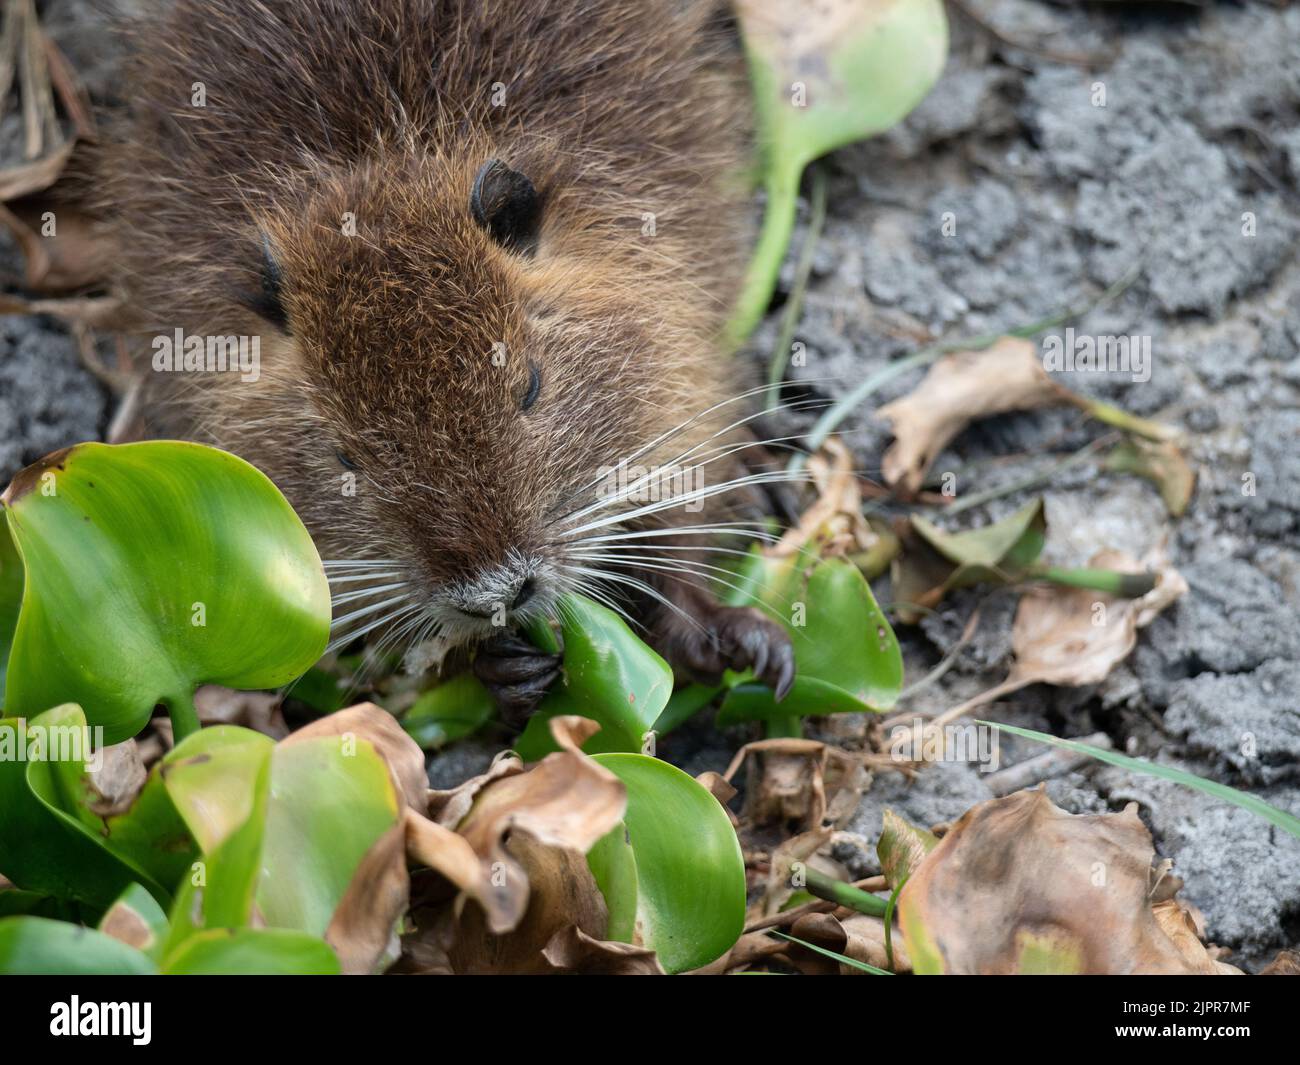 Young nutria feeding on water hyacinth leaves in a dried lake bed in Texas. Stock Photo